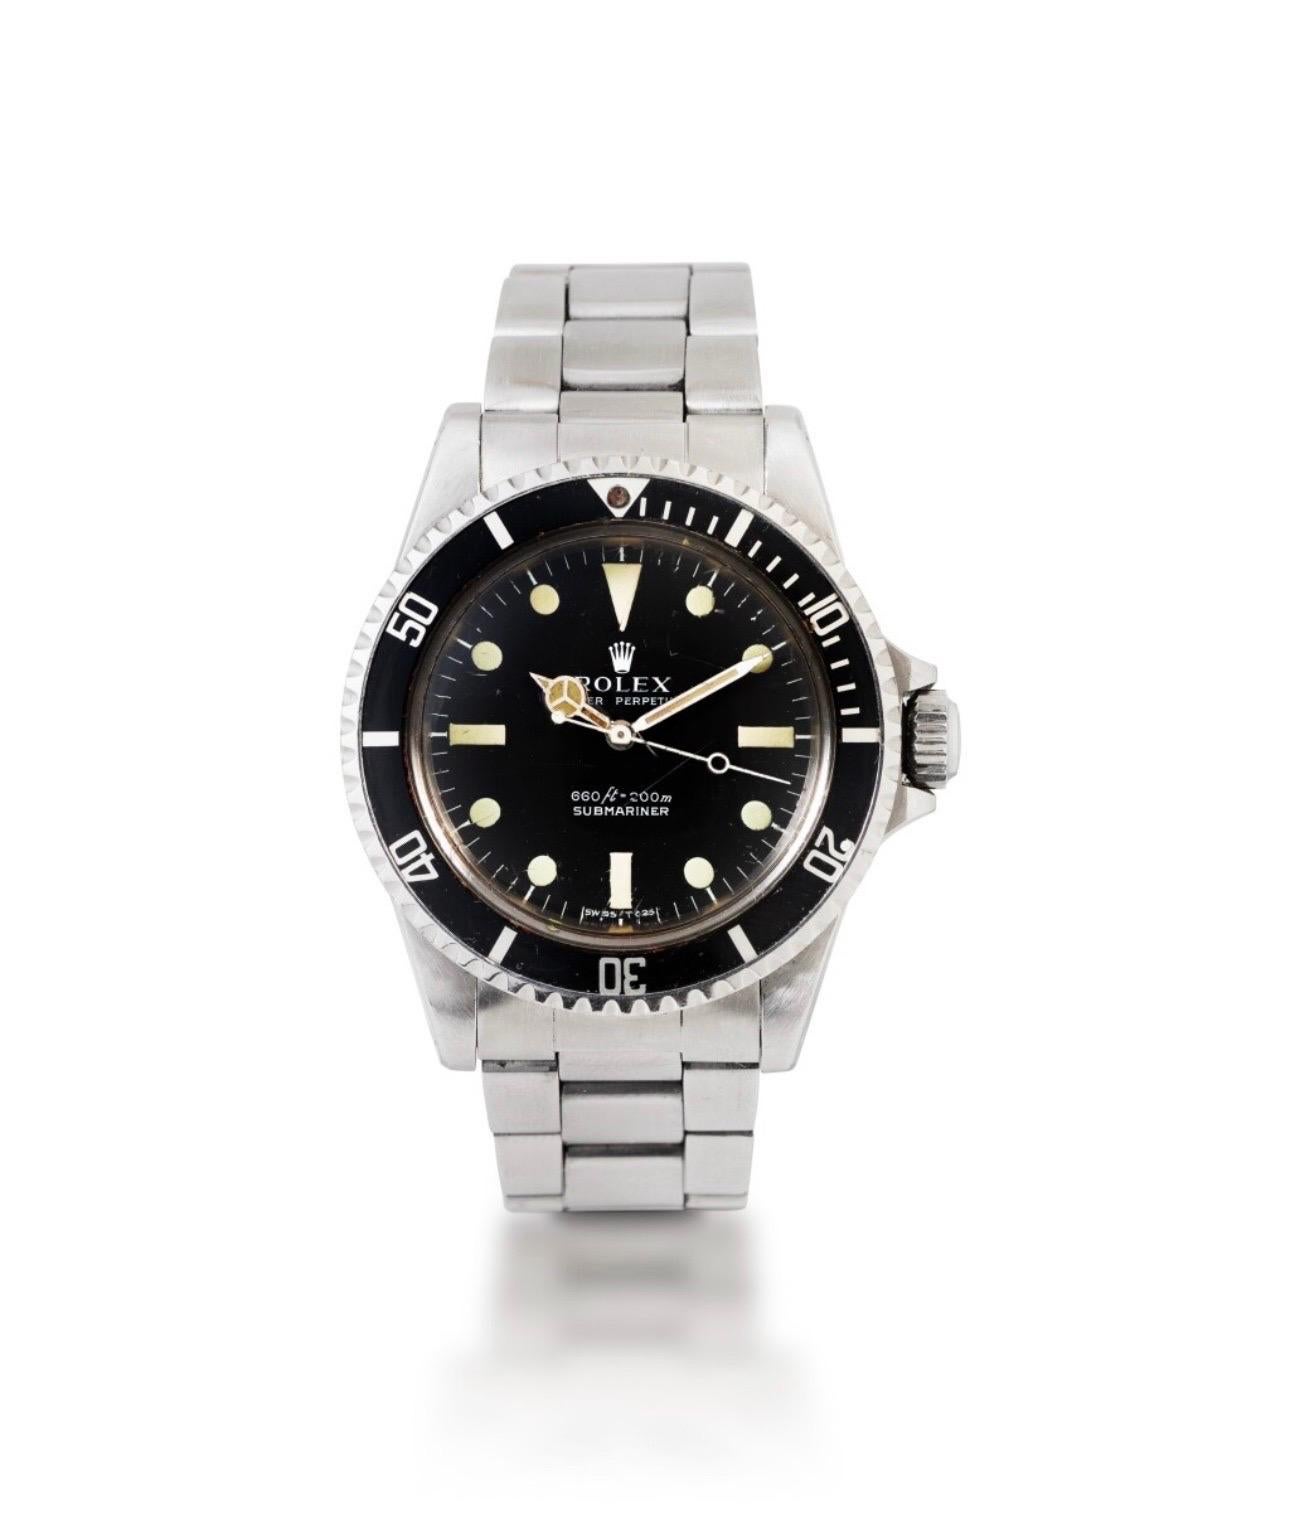 Stainless Steel Rolex Submariner, 5513, Circa 1978 For Sale